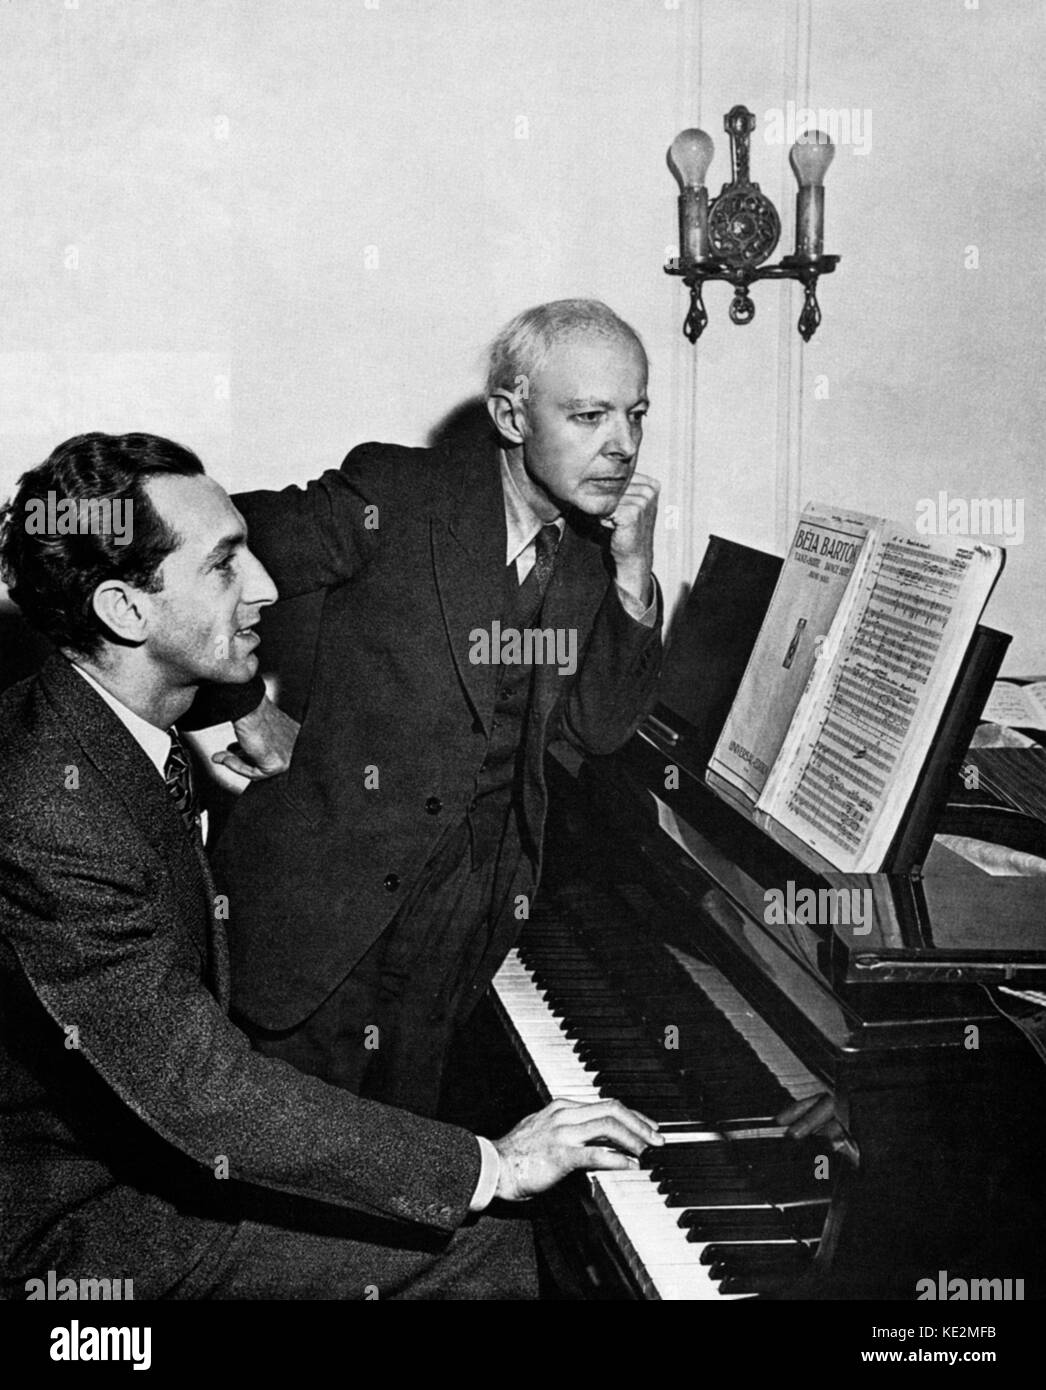 Gyorgy Sandor at the piano  with Bela Bartok.  Sandor is playing  a Bartok composition. Sandor was solist for premiere of Bartok 's Concerto No.3 for piano and orchestra on 8 February, 1946. Stock Photo